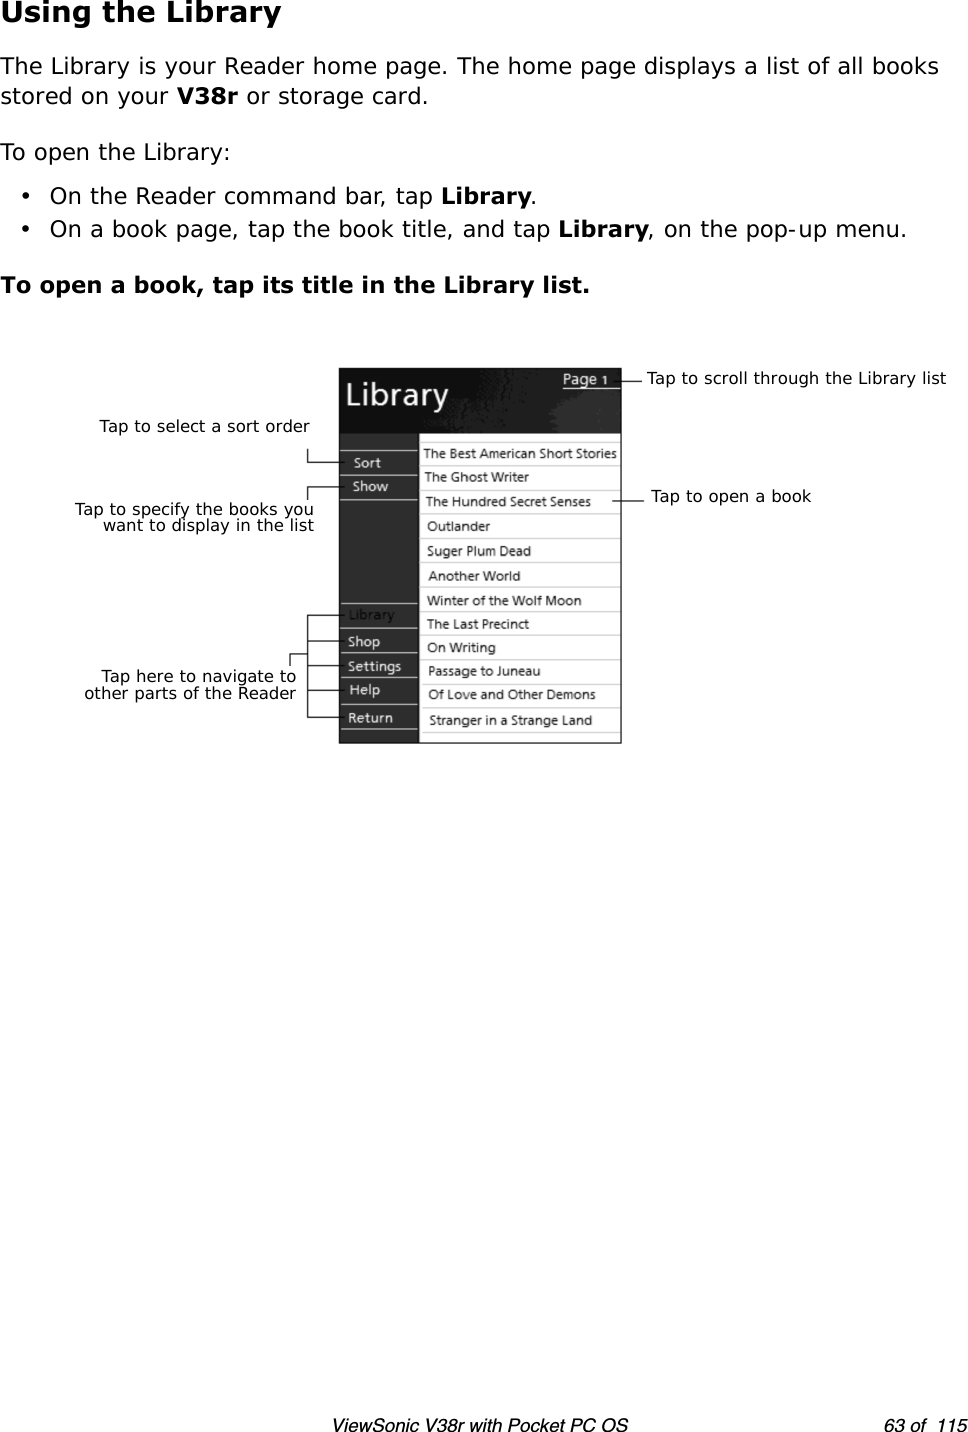 ViewSonic V38r with Pocket PC OS 63 of  115Using the LibraryThe Library is your Reader home page. The home page displays a list of all books stored on your V38r or storage card.To open the Library:• On the Reader command bar, tap Library.• On a book page, tap the book title, and tap Library, on the pop-up menu.To open a book, tap its title in the Library list.Tap to scroll through the Library listTap to select a sort orderTap to specify the books youwant to display in the listTap here to navigate toother parts of the ReaderTap to open a book